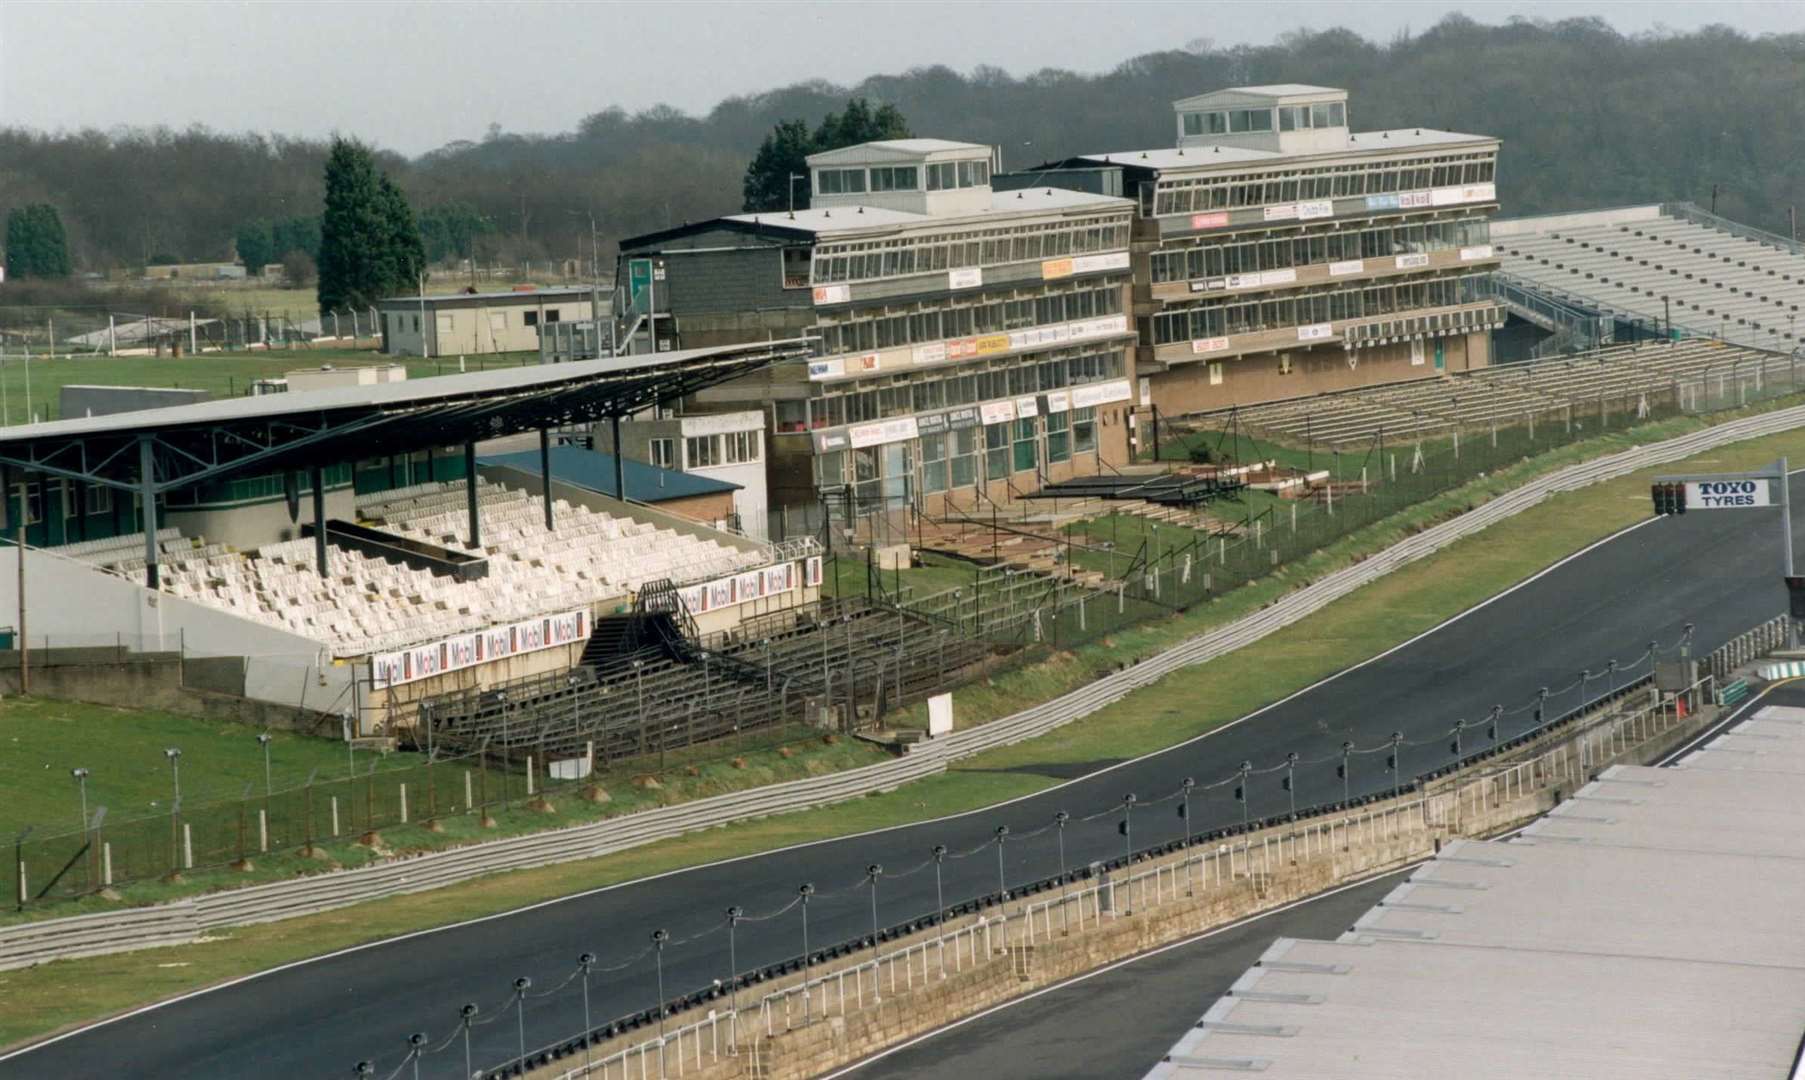 The Brabham Straight at Brands Hatch pictured in February 1997